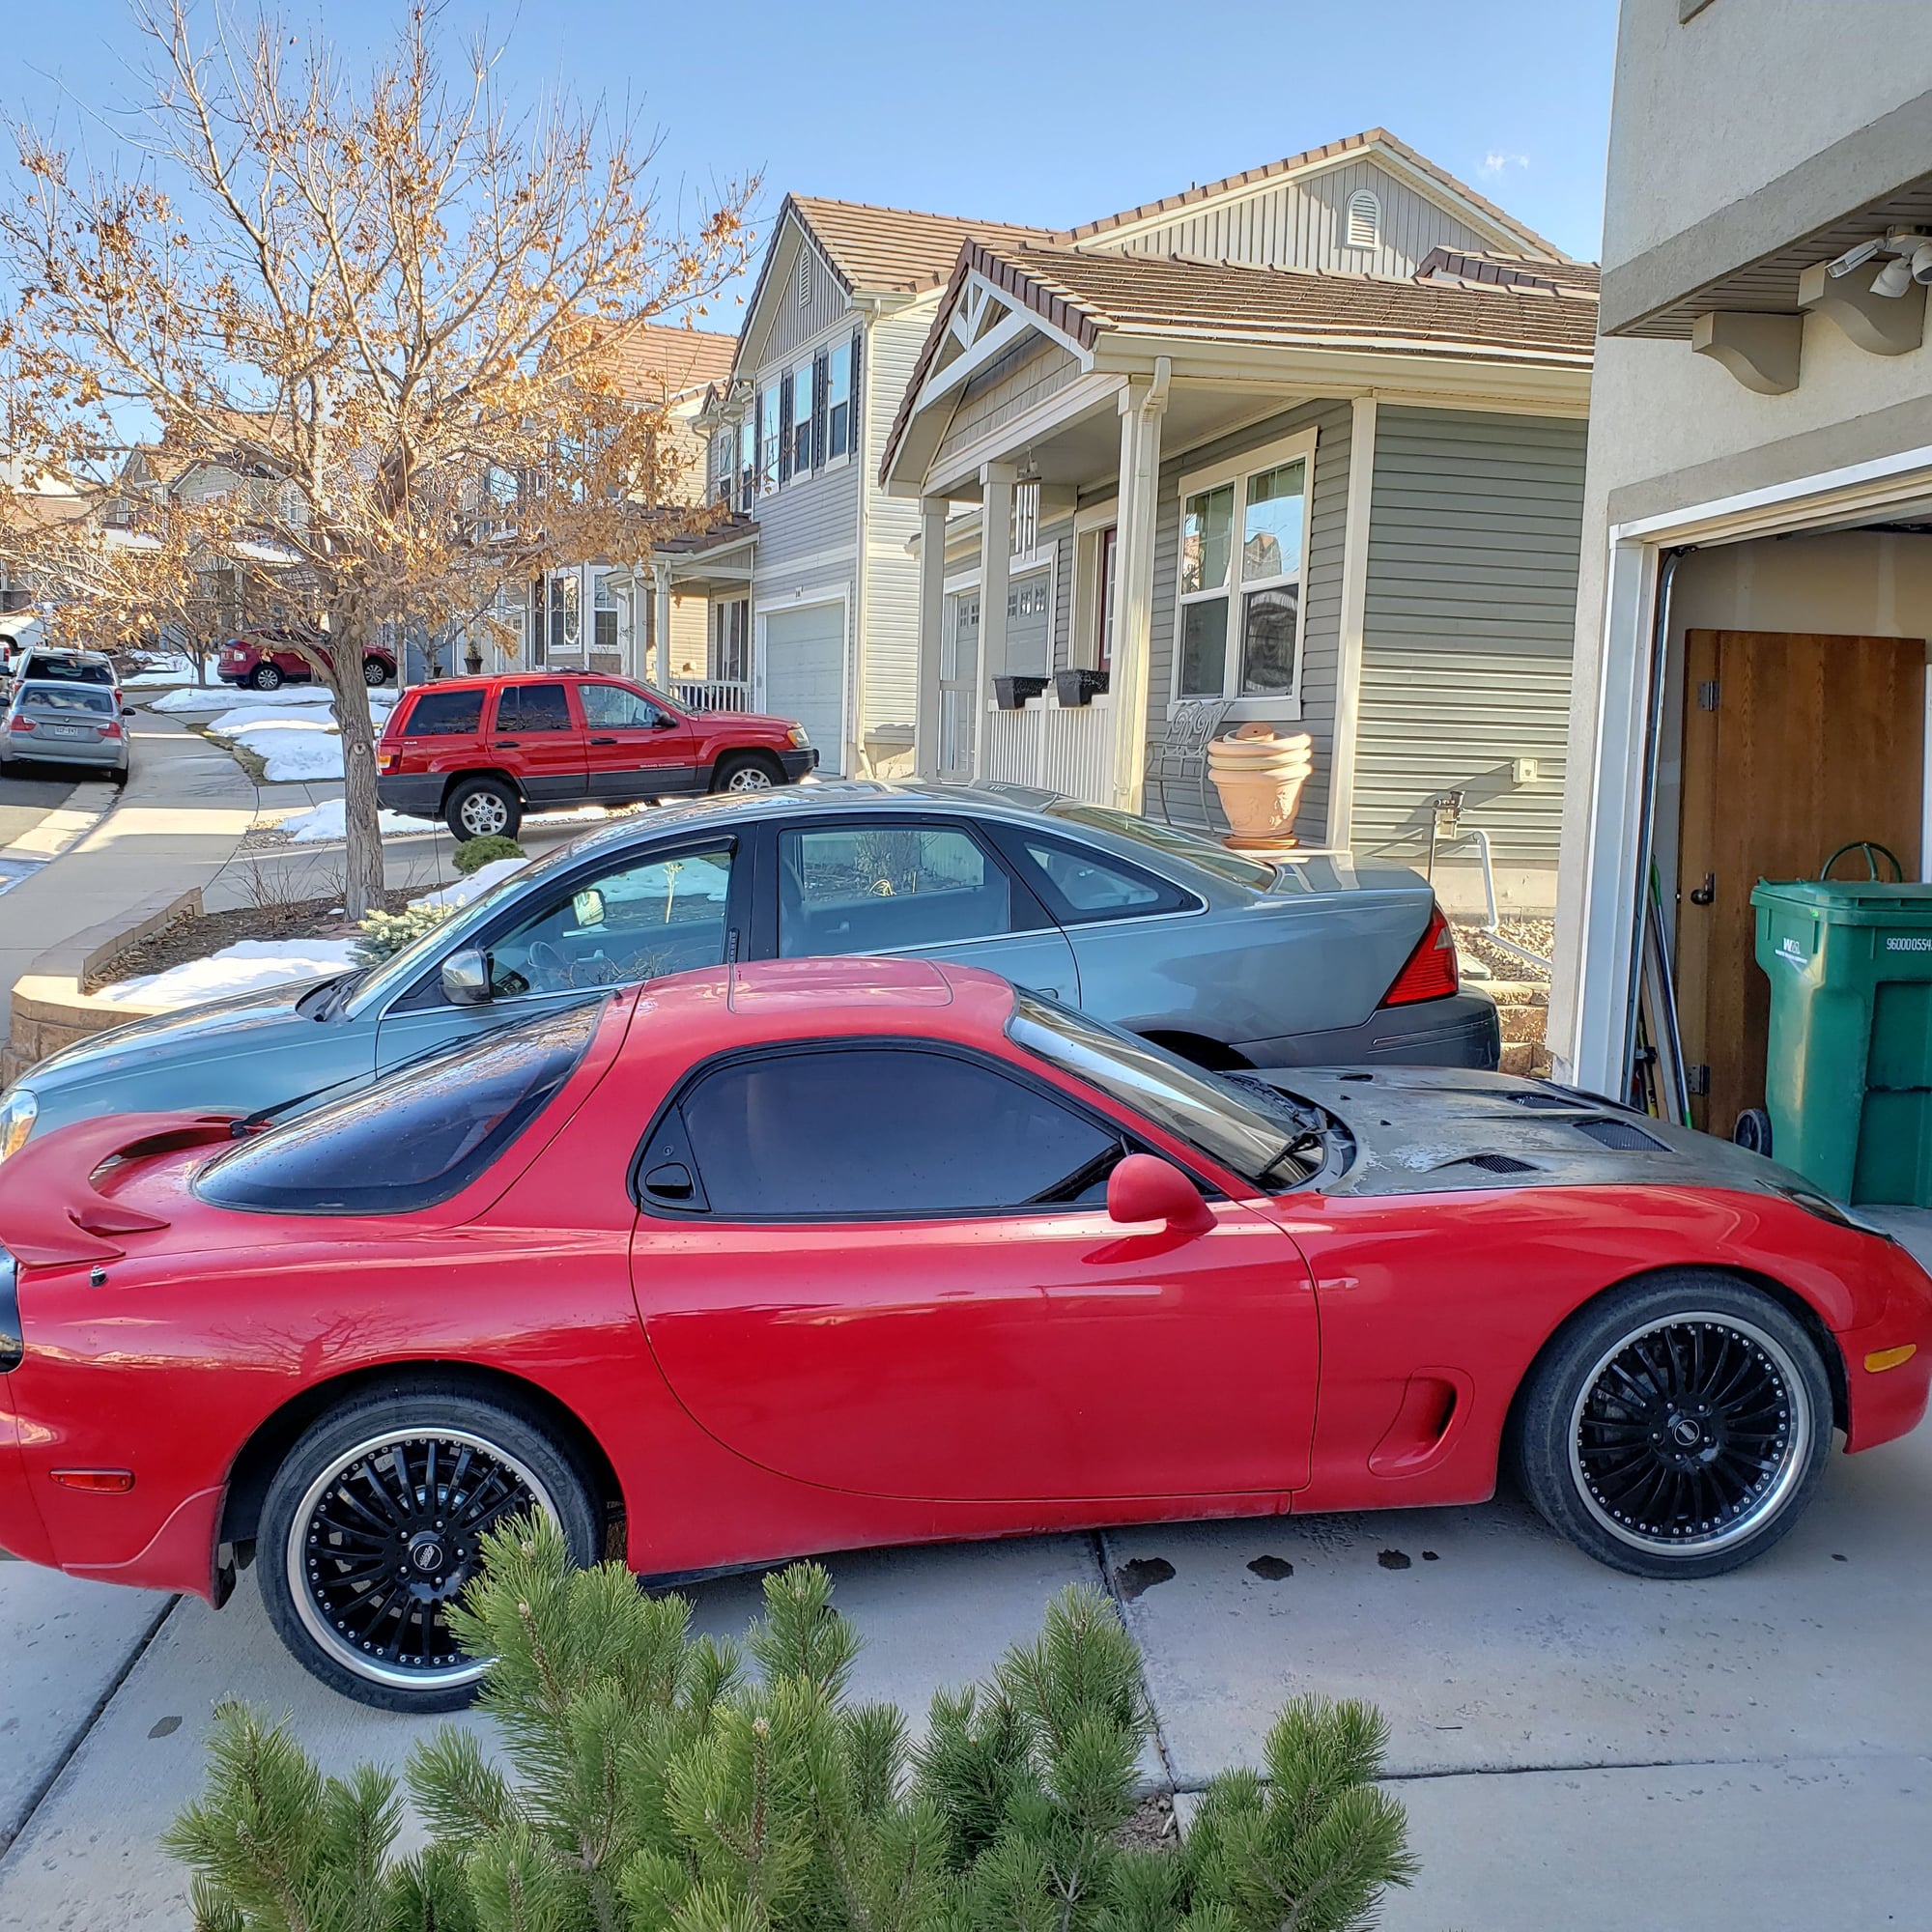 1993 Mazda RX-7 - 1993 Rx-7 Project for sale - Used - VIN JM1FD3316P0208995 - 84,000 Miles - Other - 2WD - Manual - Red - Castle Rock, CO 80109, United States